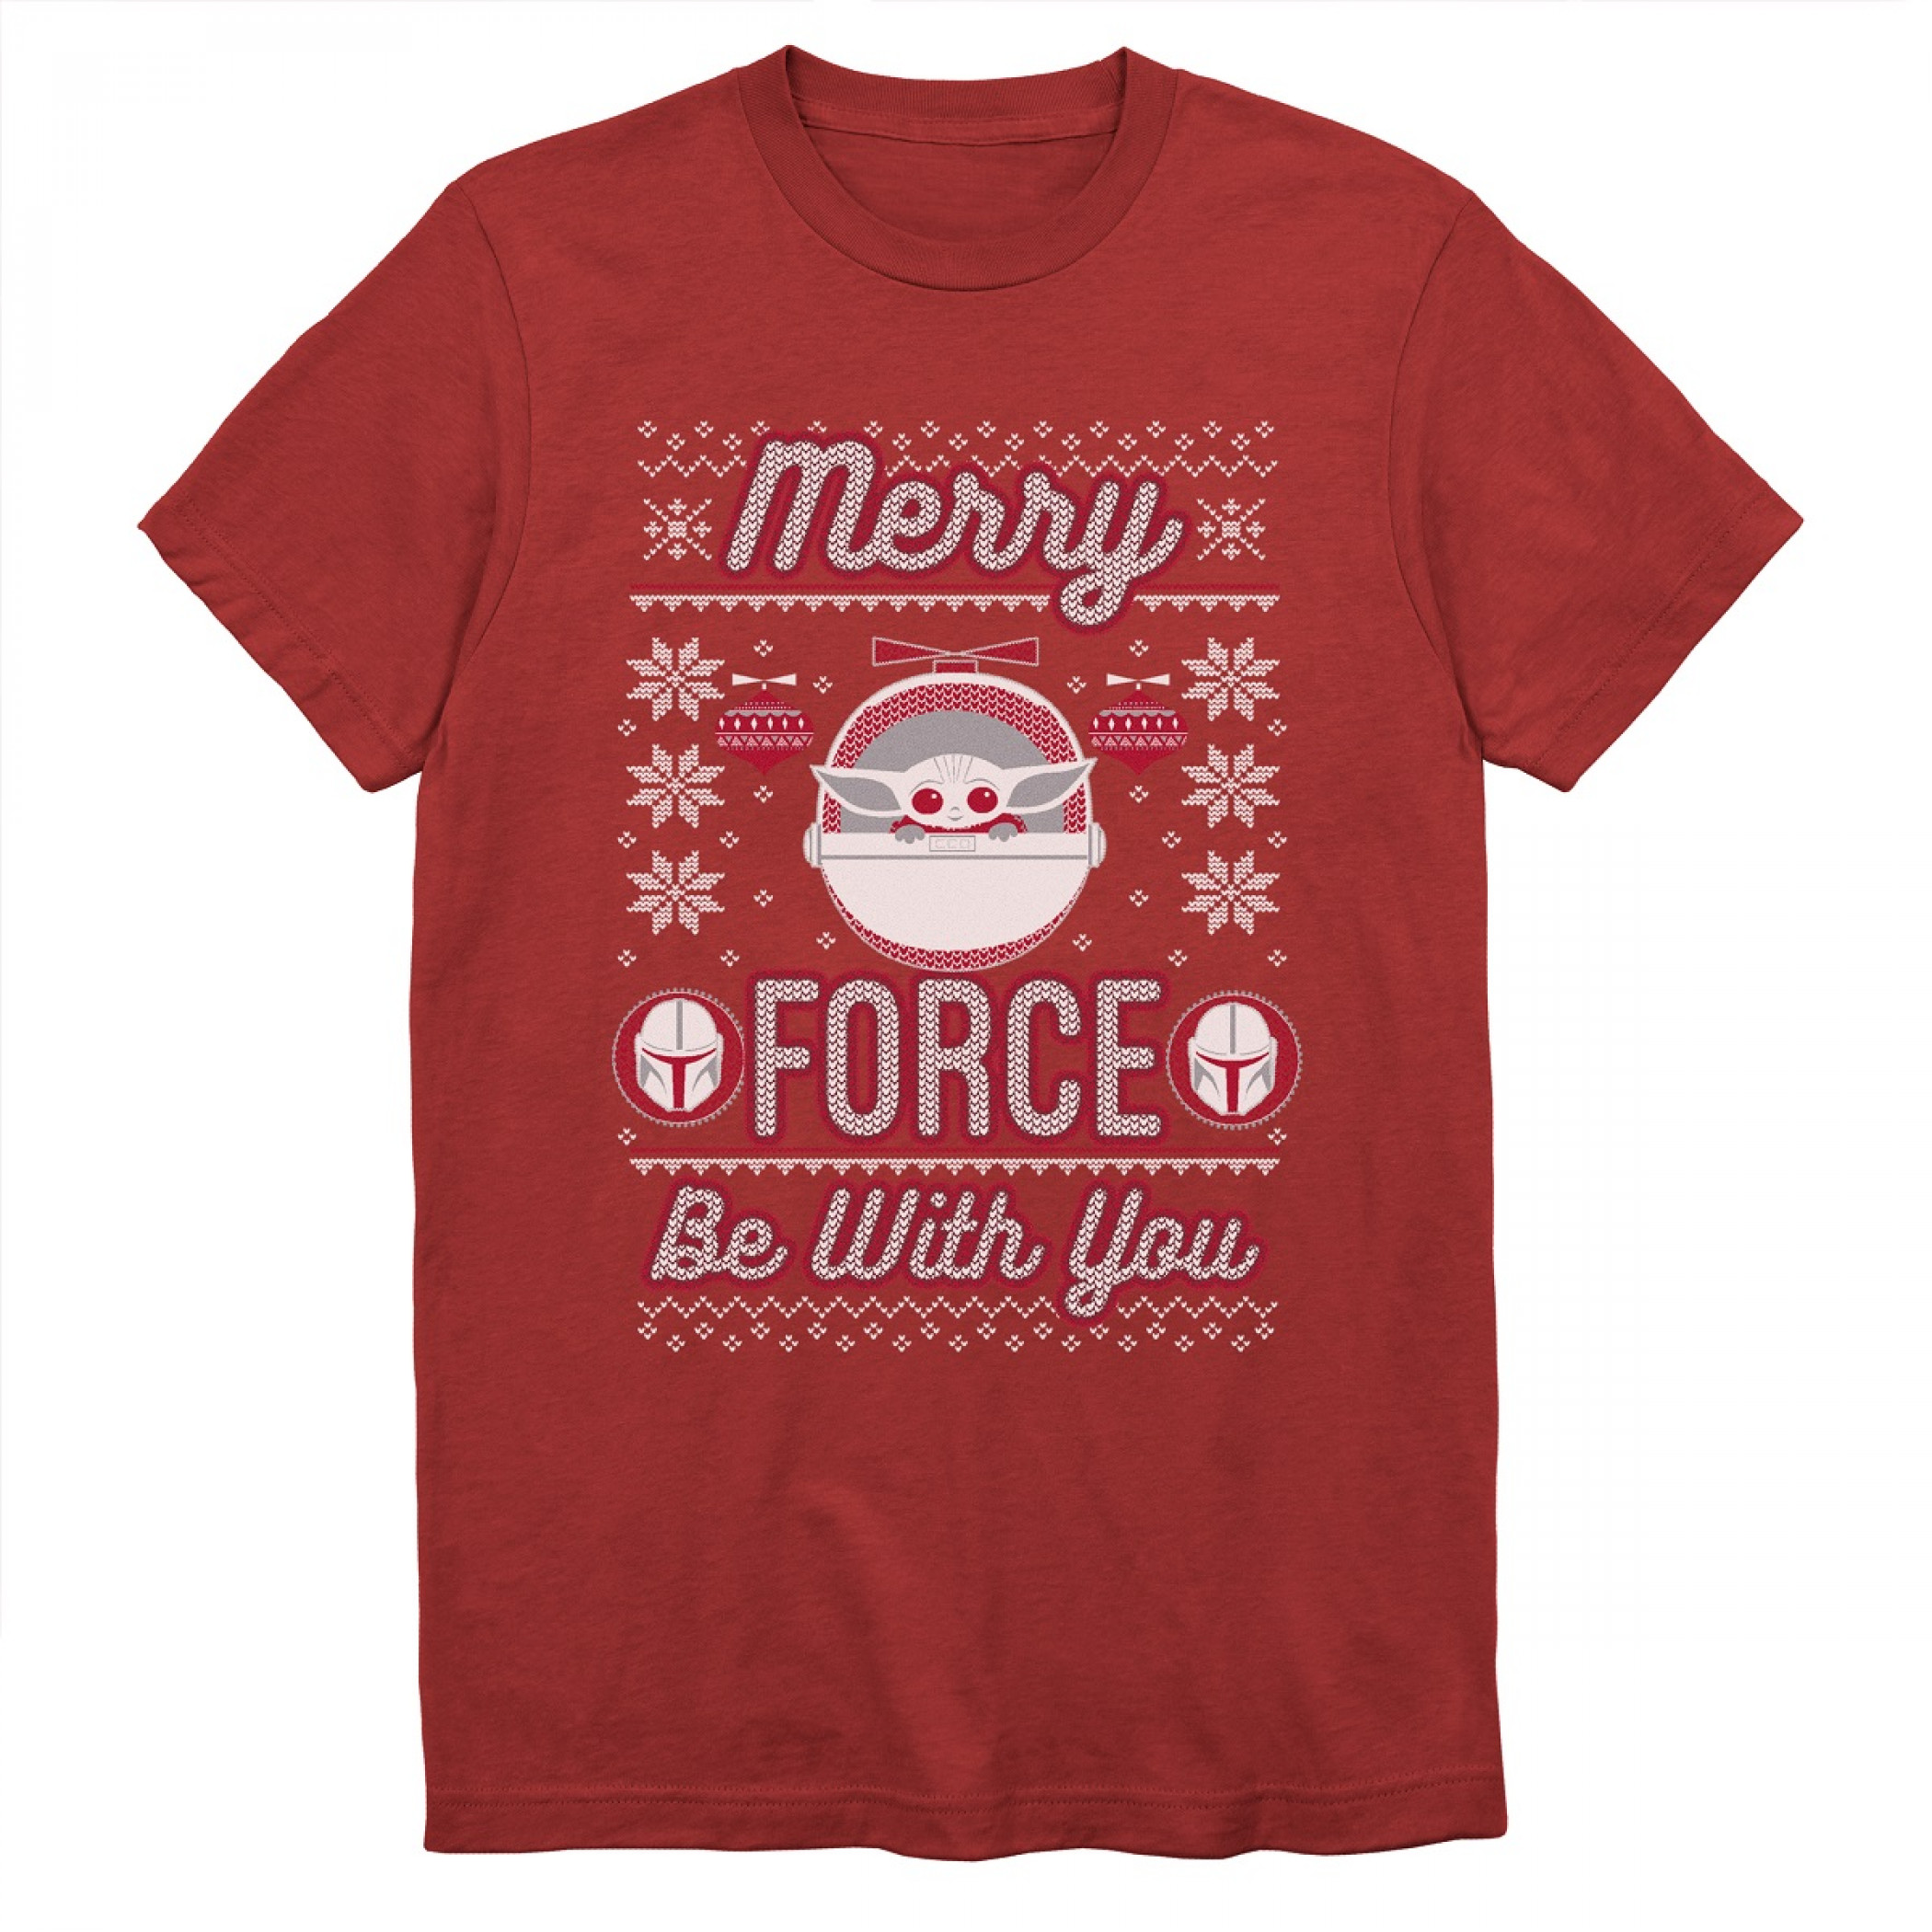 Star Wars Mandalorian The Child Merry FORCE Be with You T-Shirt